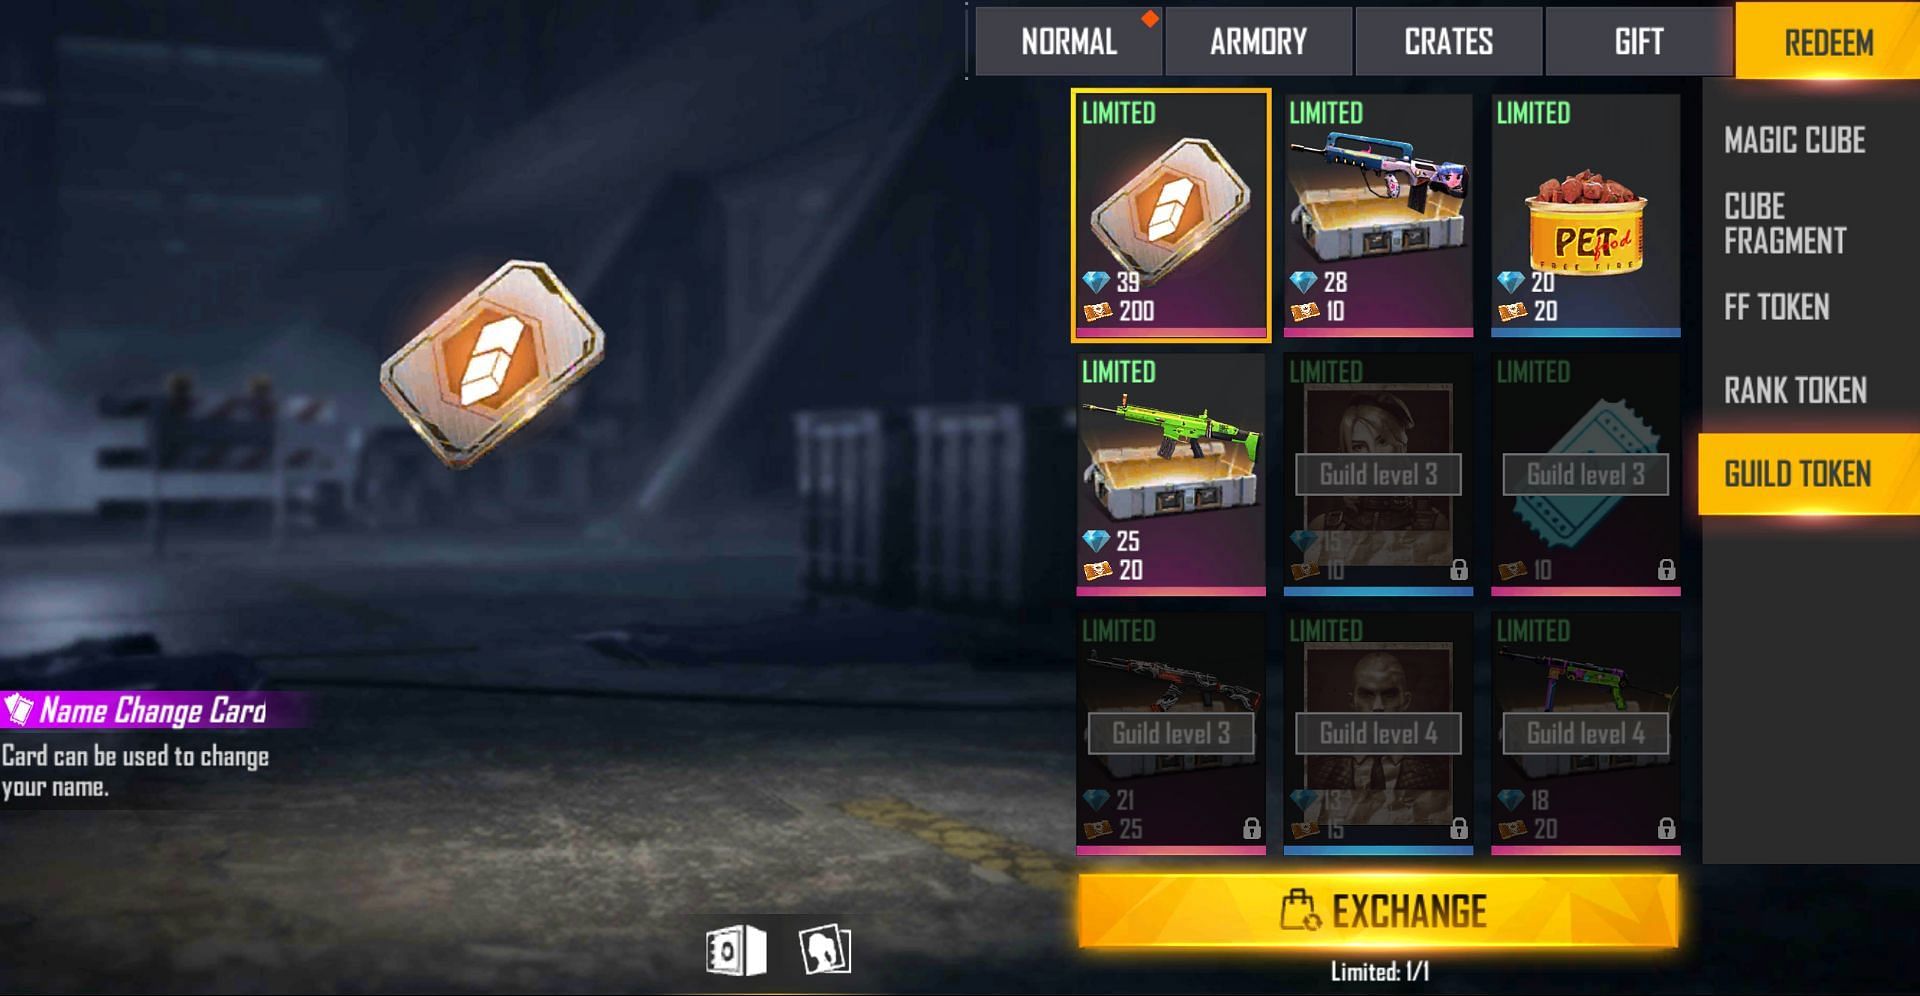 The name change card is available within the store (Image via Free Fire)